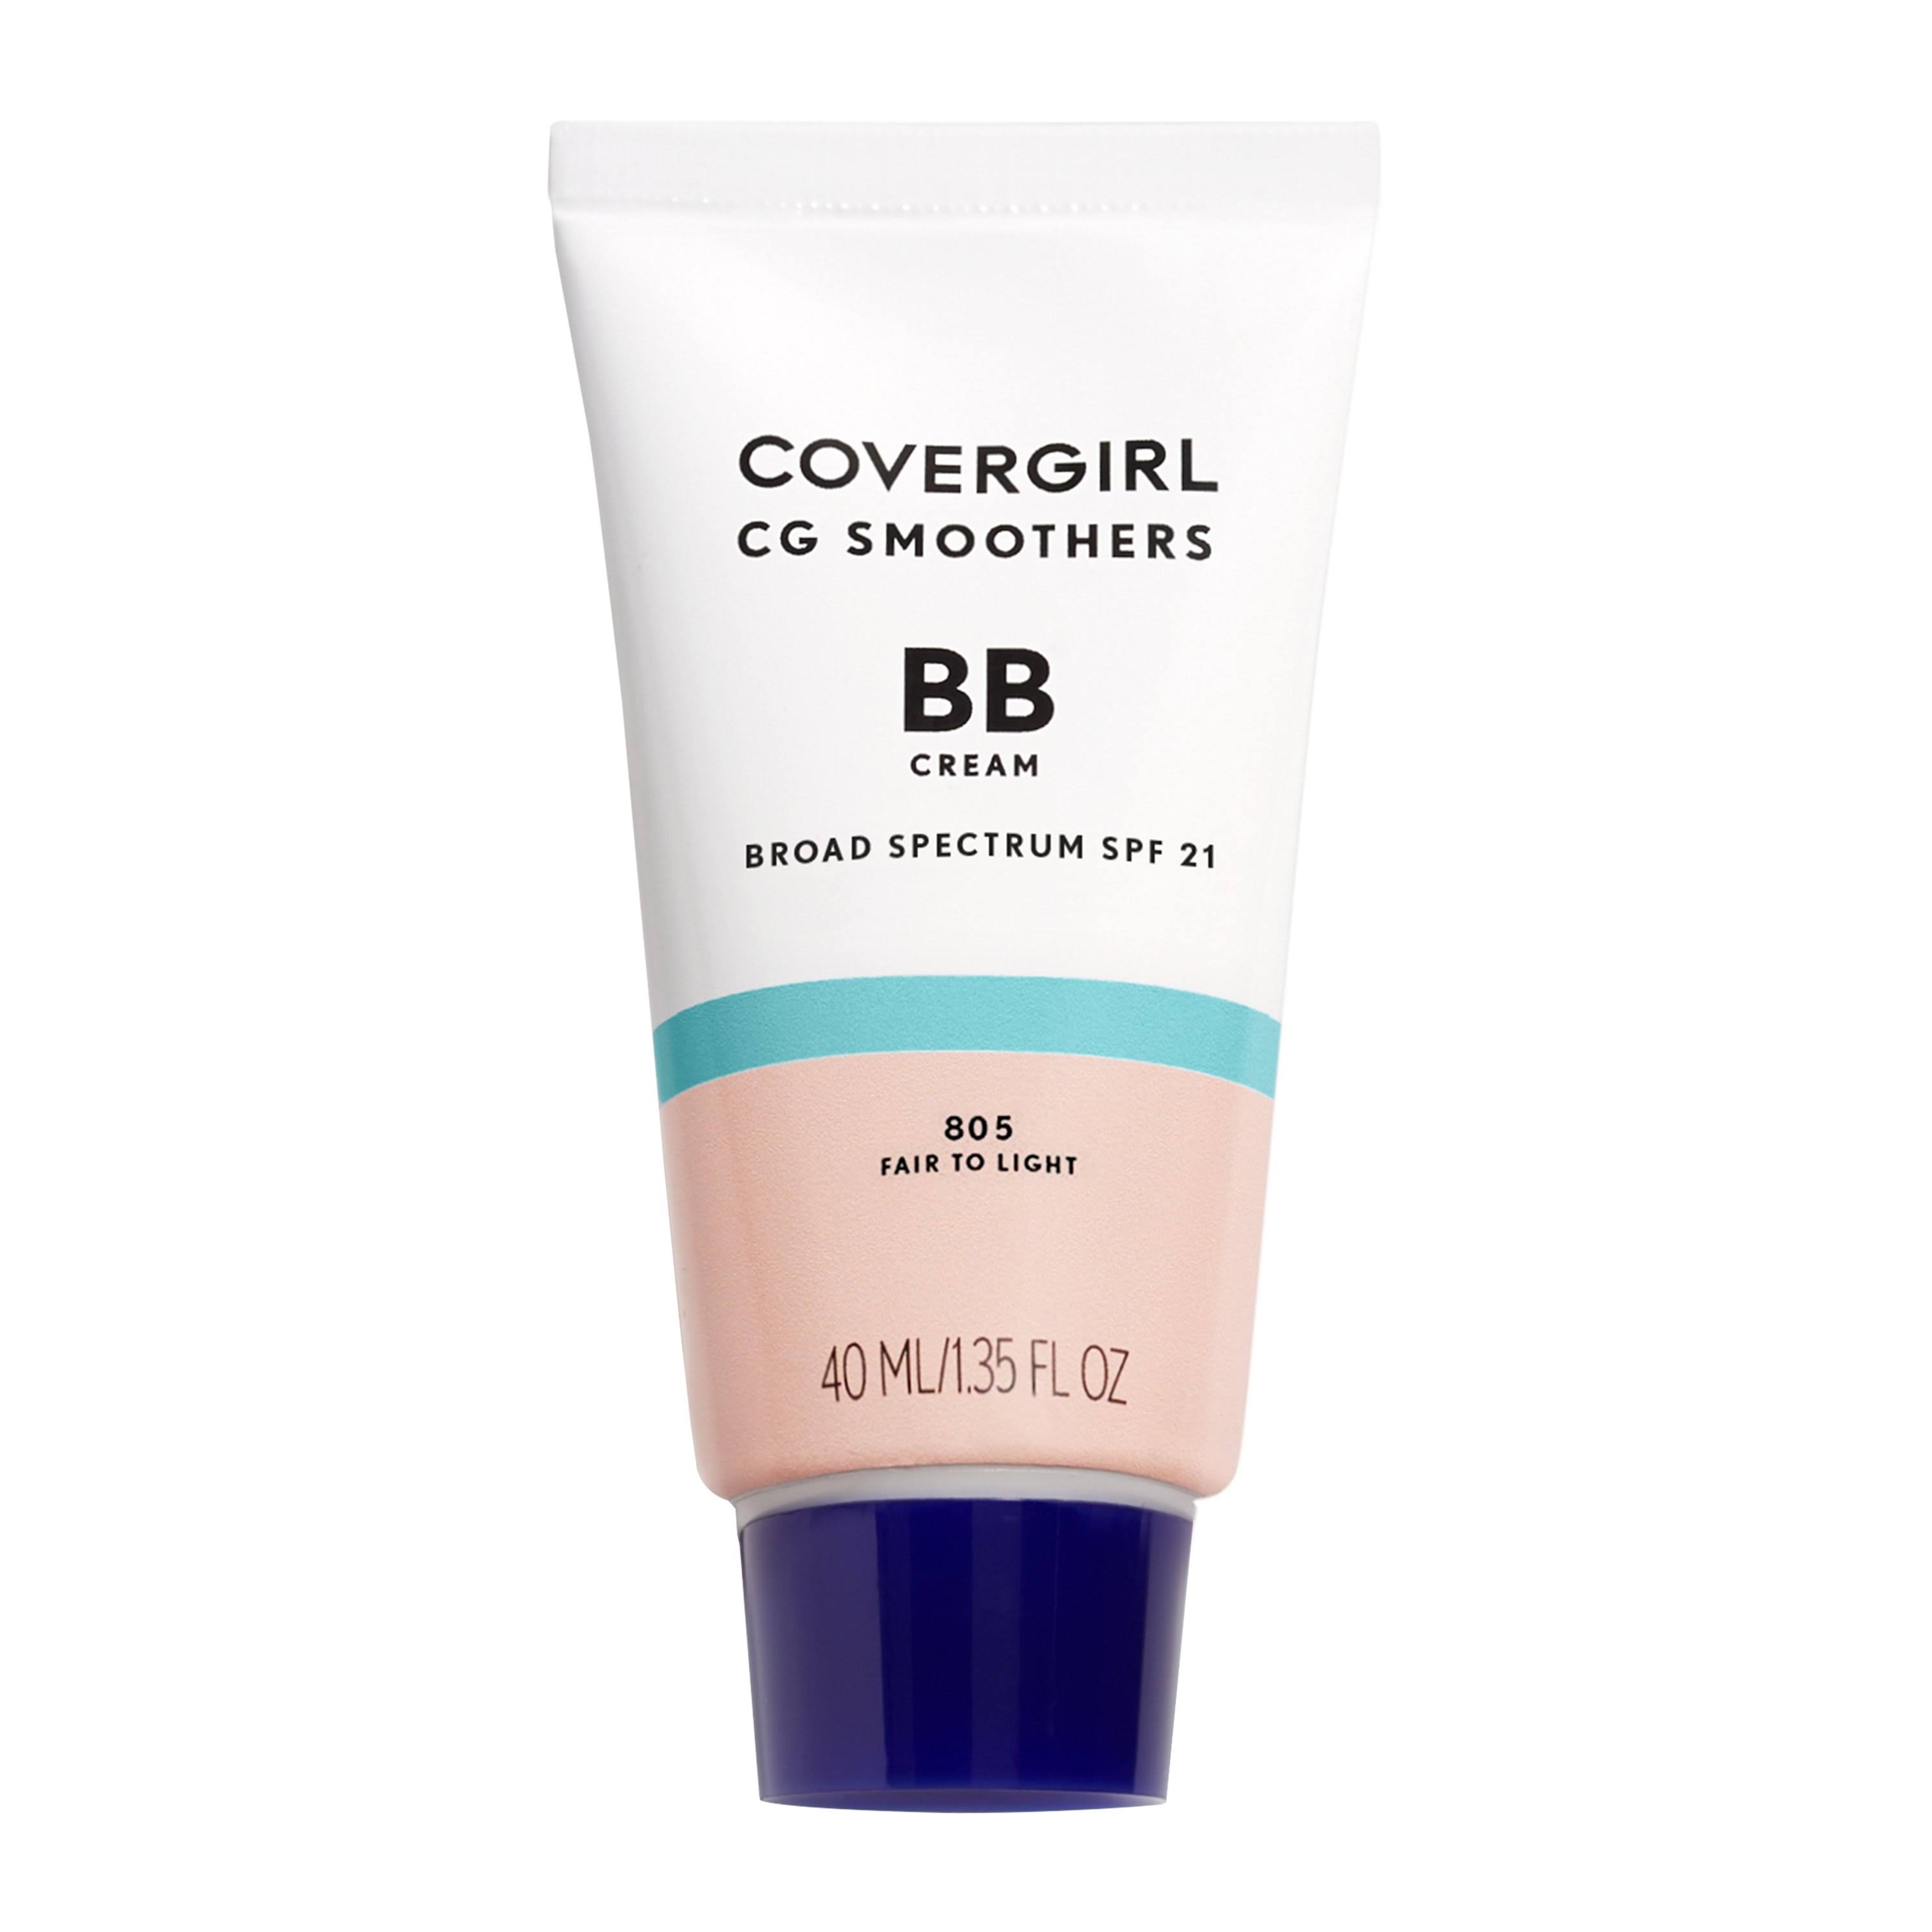 Covergirl Smoothers BB Cream - 805 Fair To Light